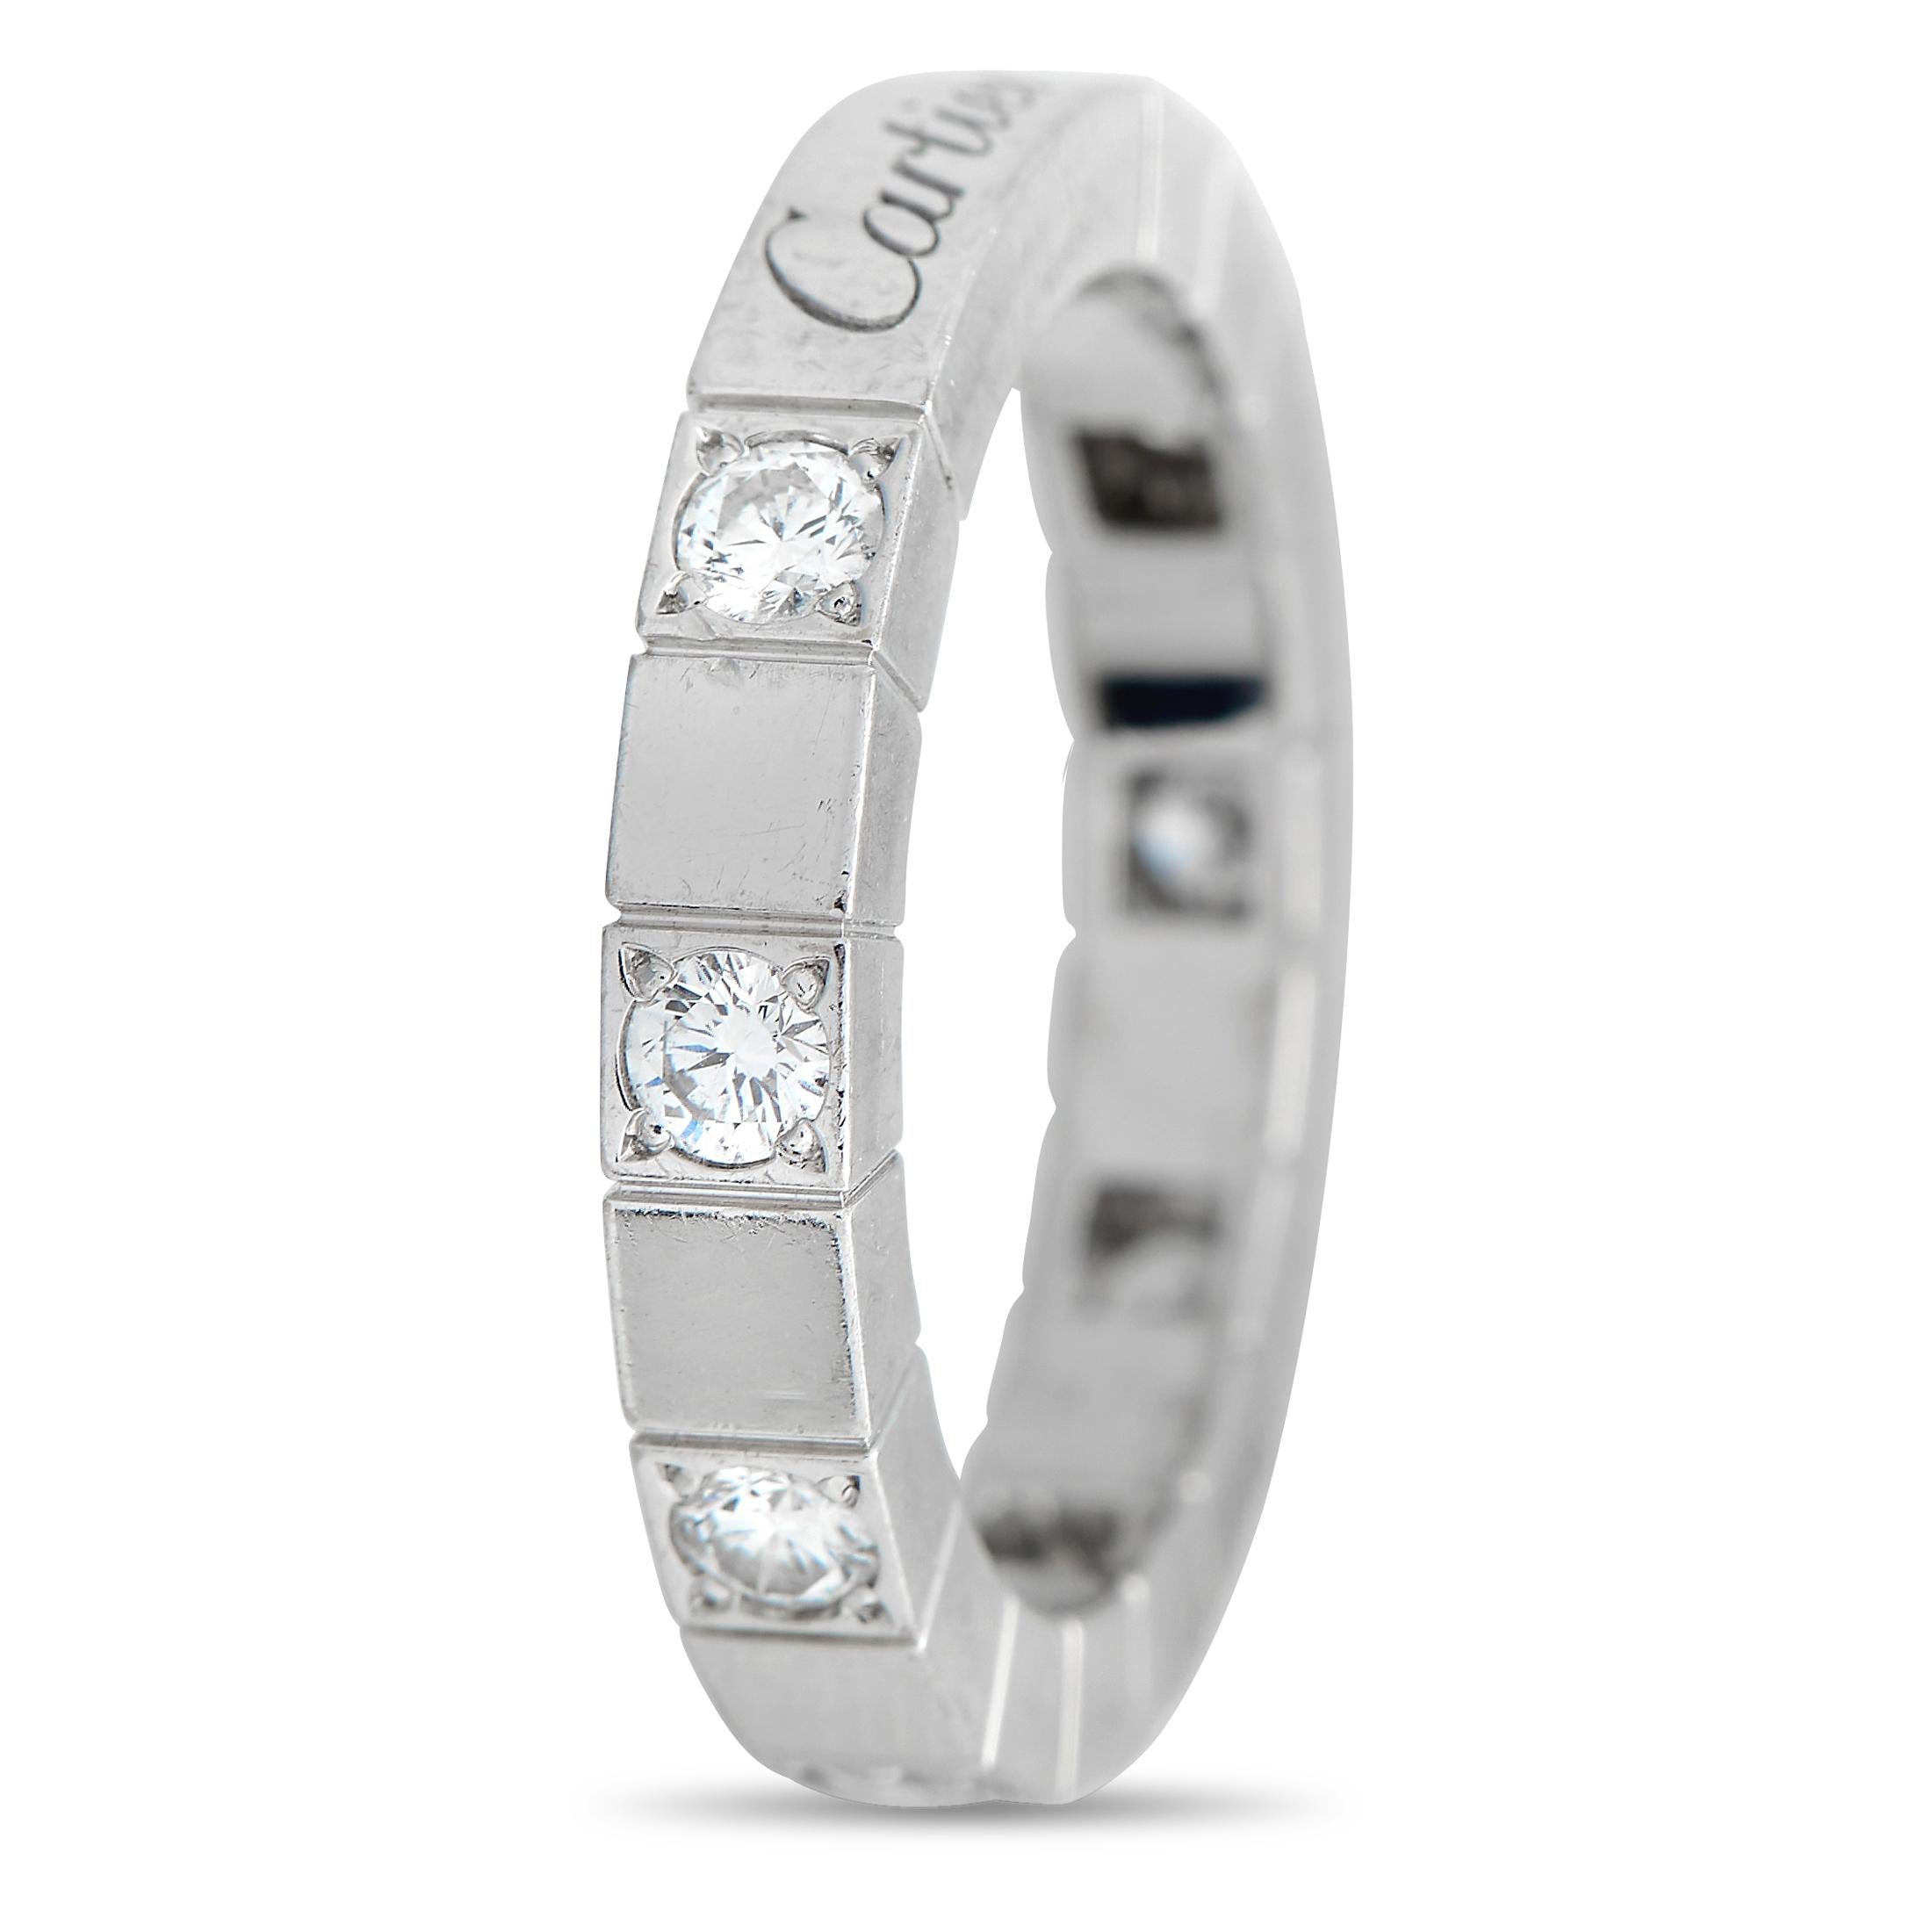 Make this Cartier Lanieres ring a part of your ensemble and effortlessly exude classic elegance. This ridged 18K white gold band measures 3mm thick and is punctuated with glittering diamonds. It's the perfect choice to give your daily wear just the